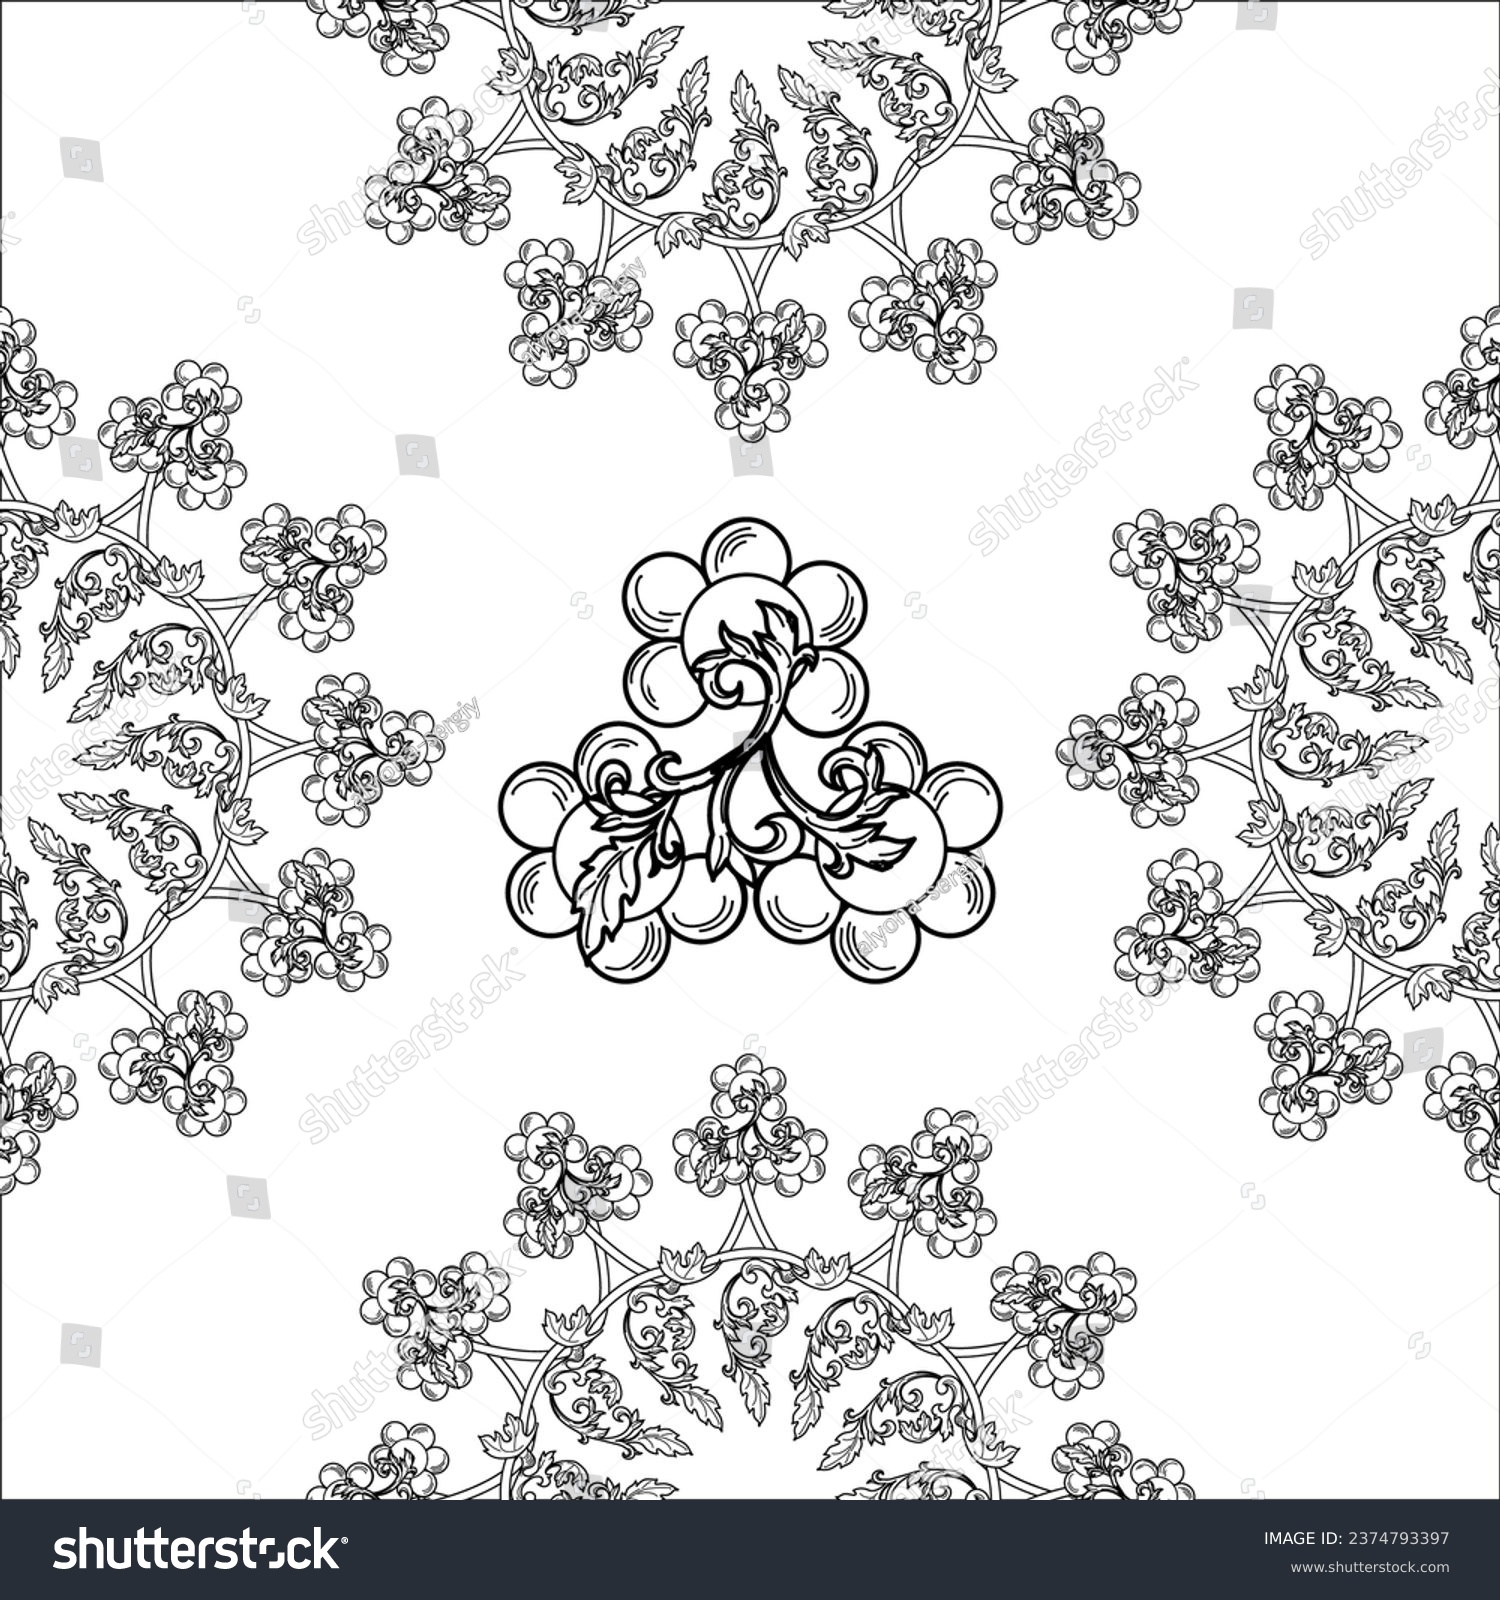 SVG of Beautiful and seamless concept. Abstract mandala pattern, blooming koleidoscope theme. Great for corporate, business and decoration svg